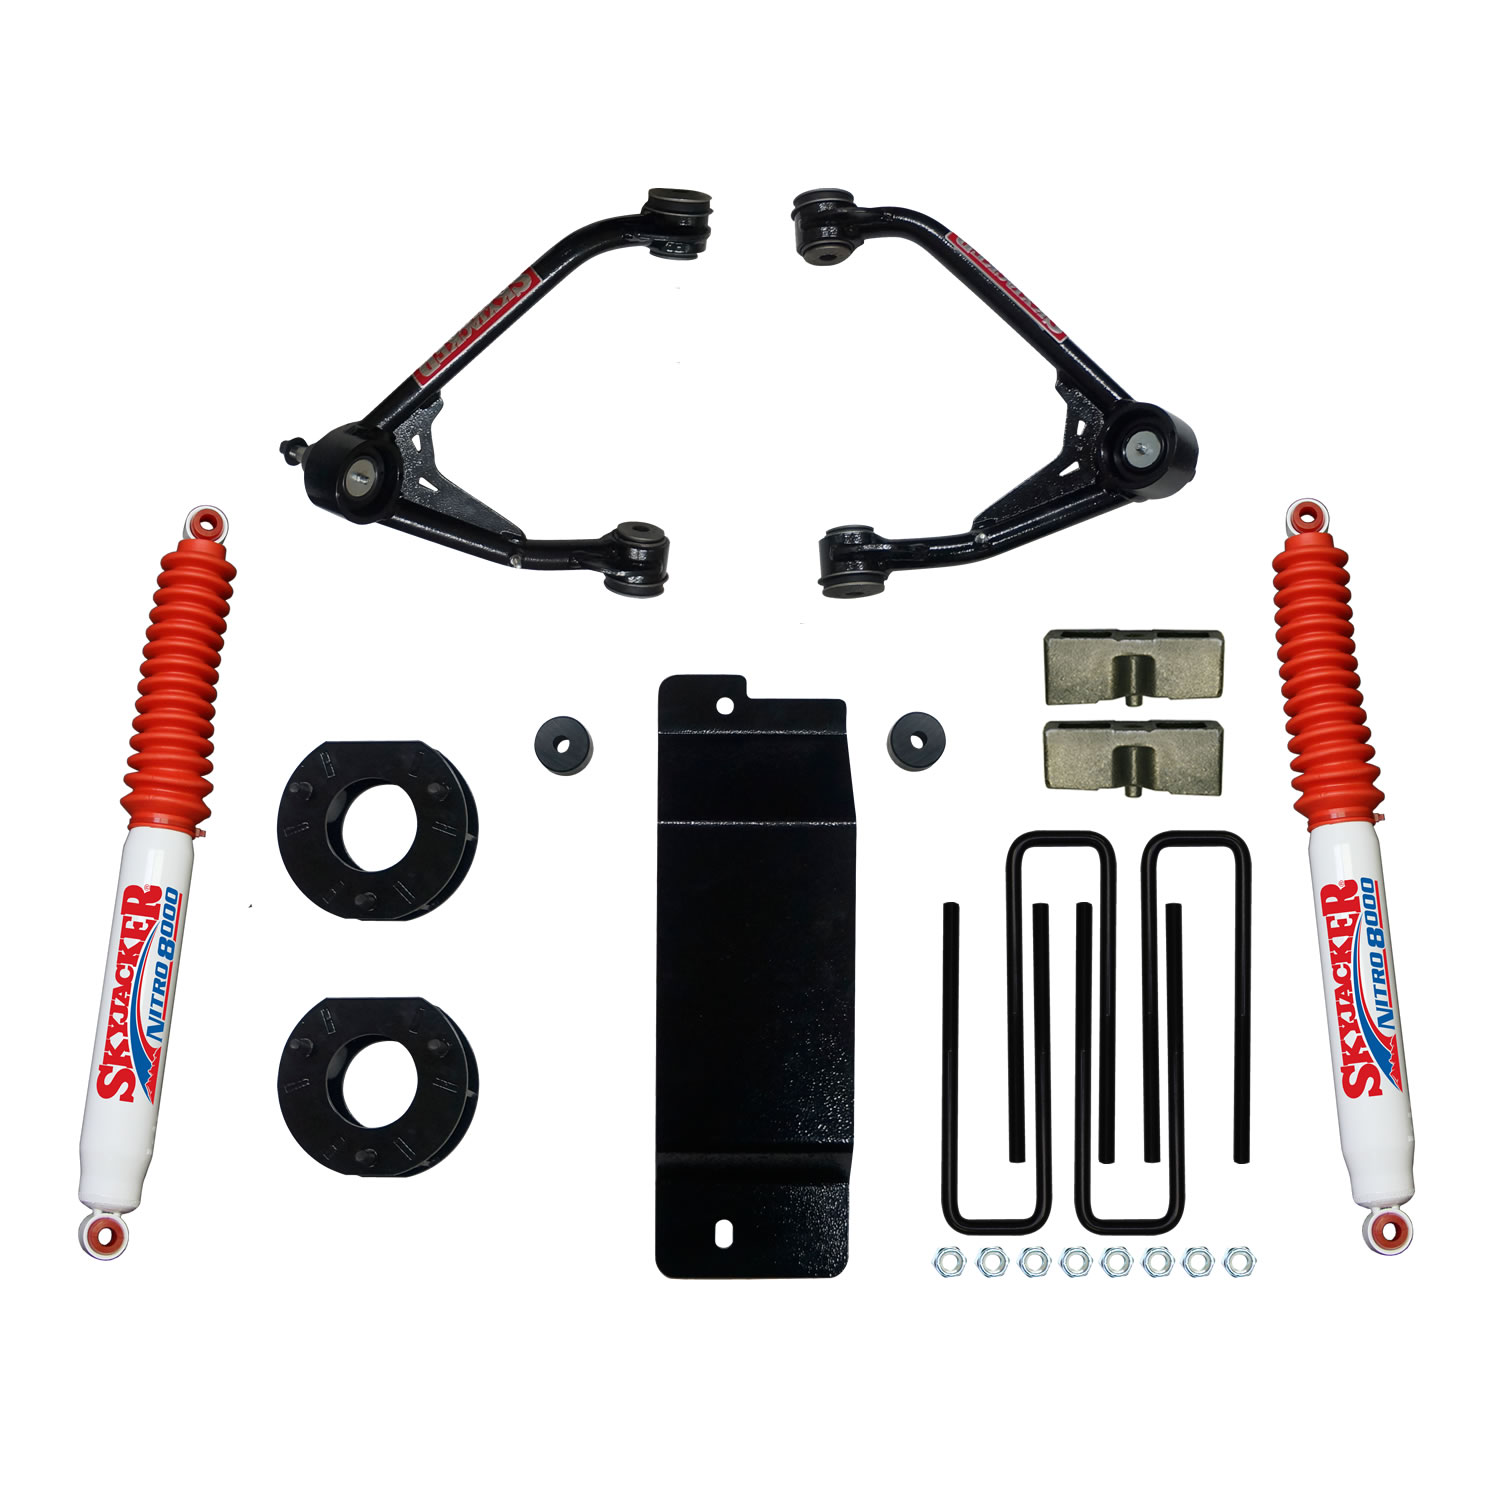 3.500-4.000 In. Upper Control Arm Lift Kit with